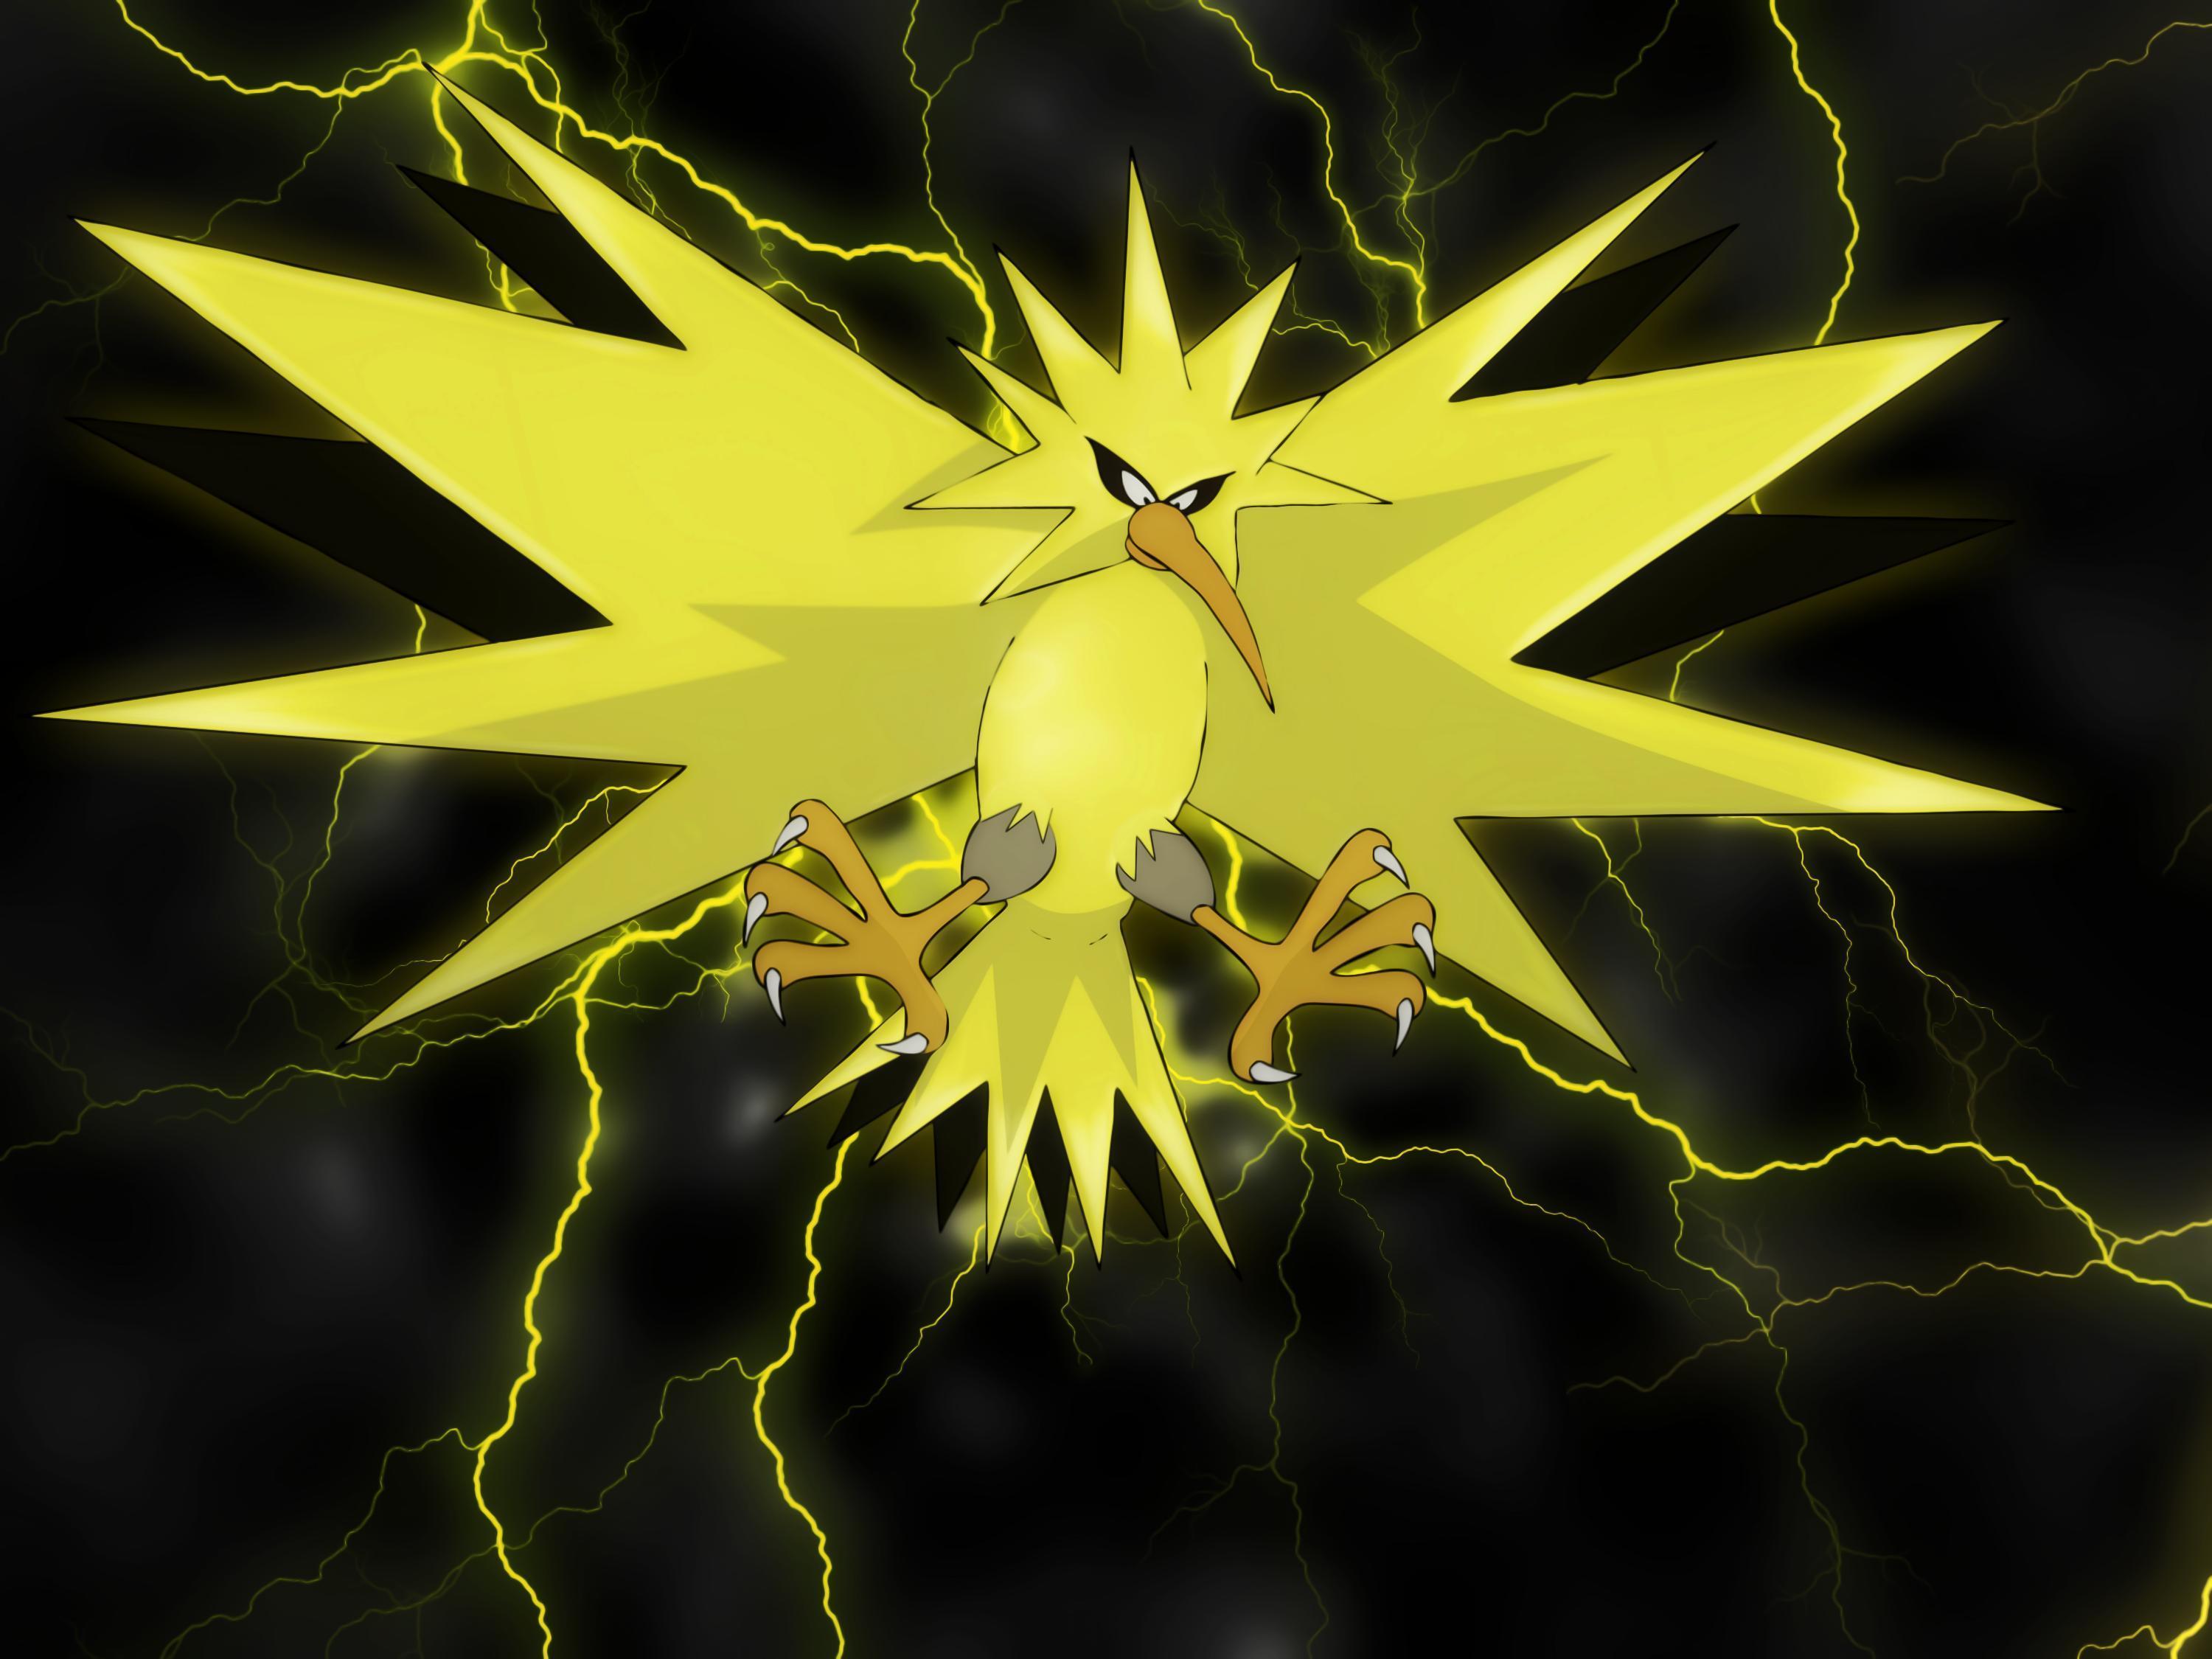 Zapdos Wallpapers.